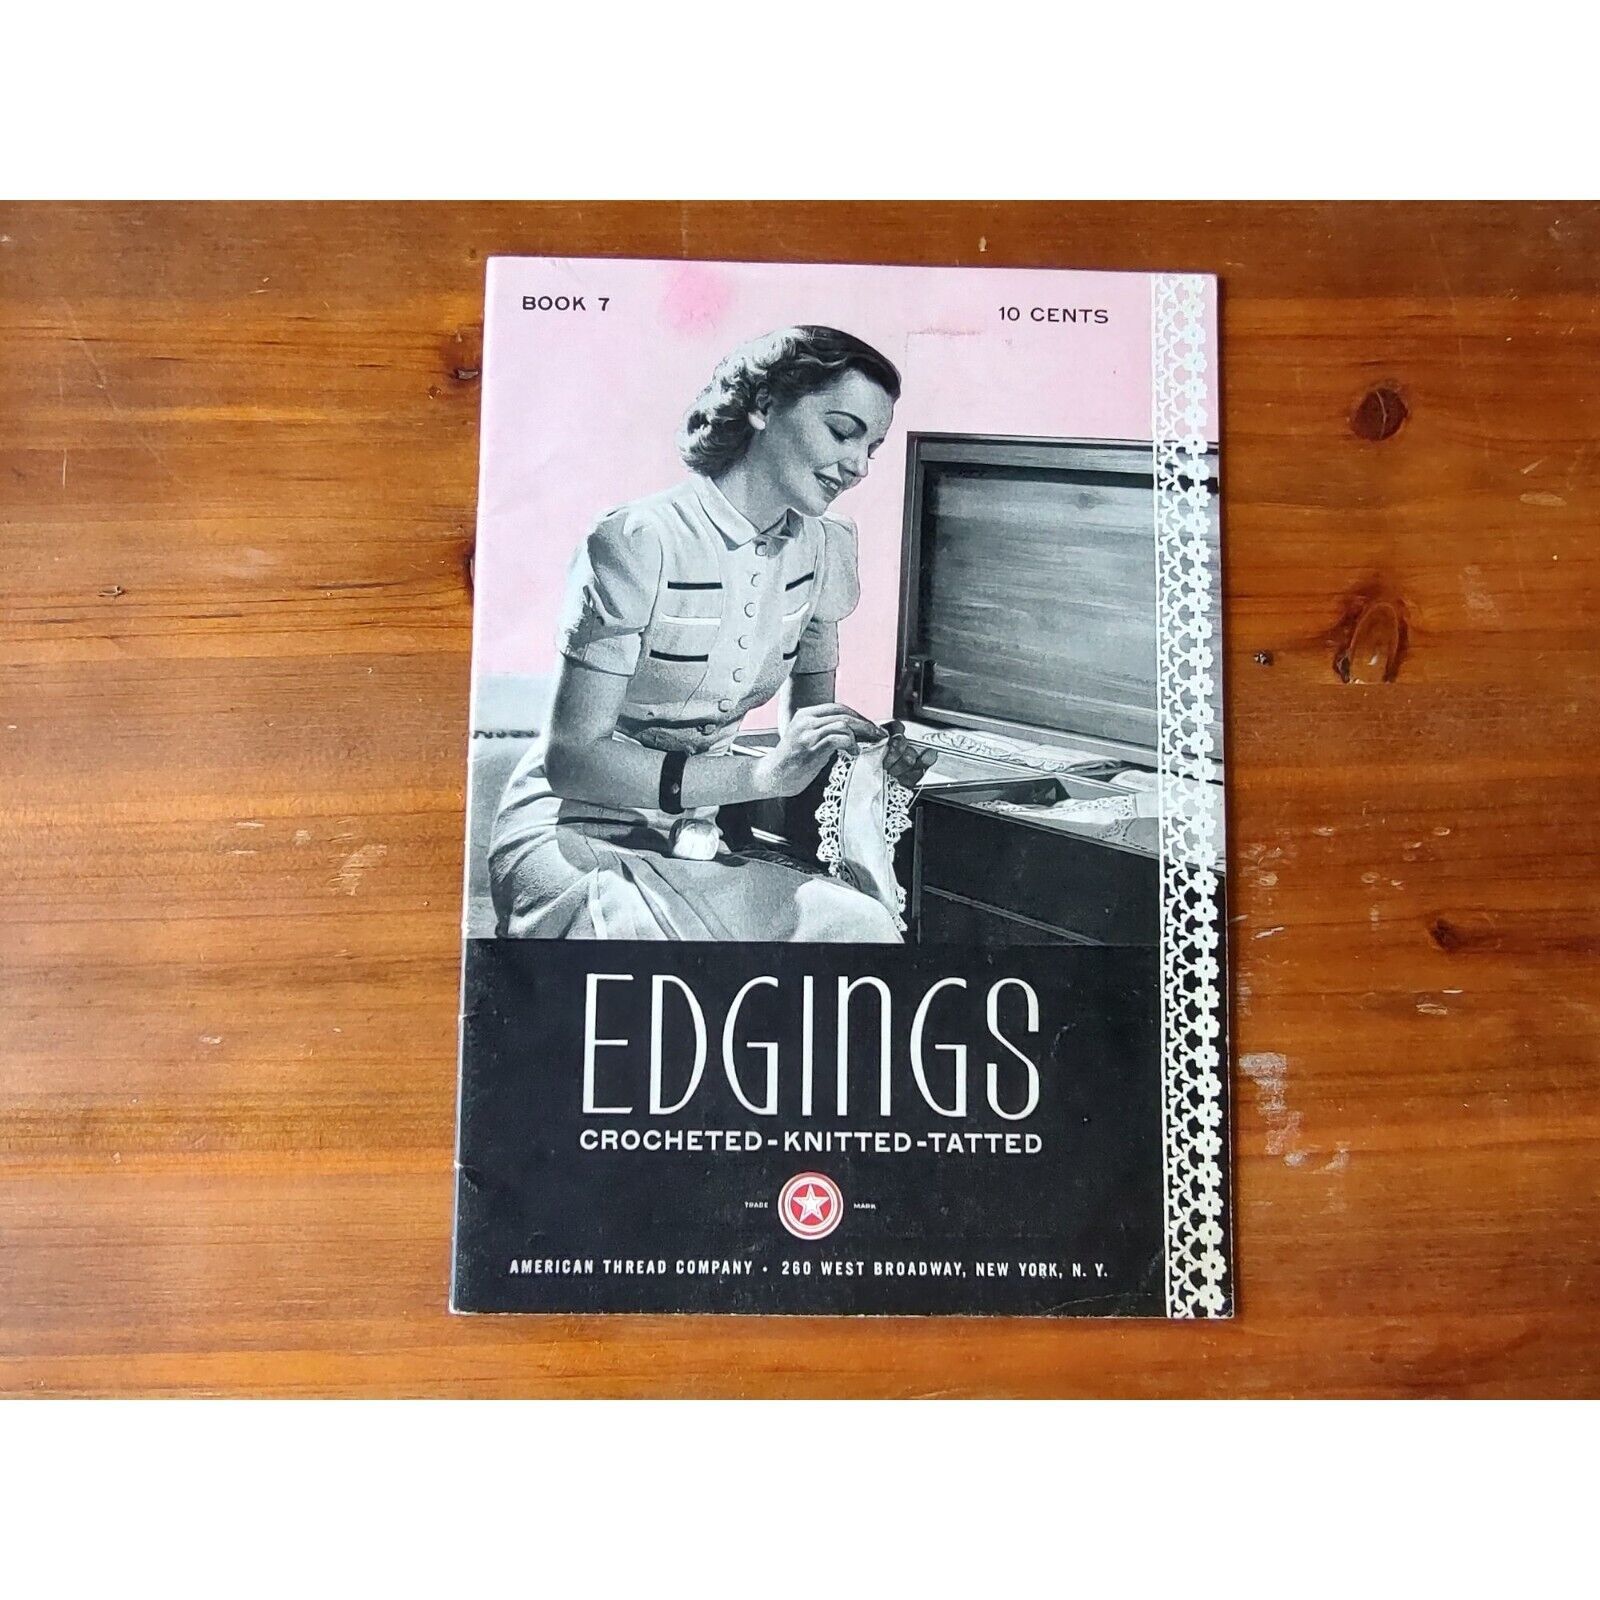 American Thread Company Edgings Crochet Knitted Tatted Book No 7  Circa 1950s - $15.79